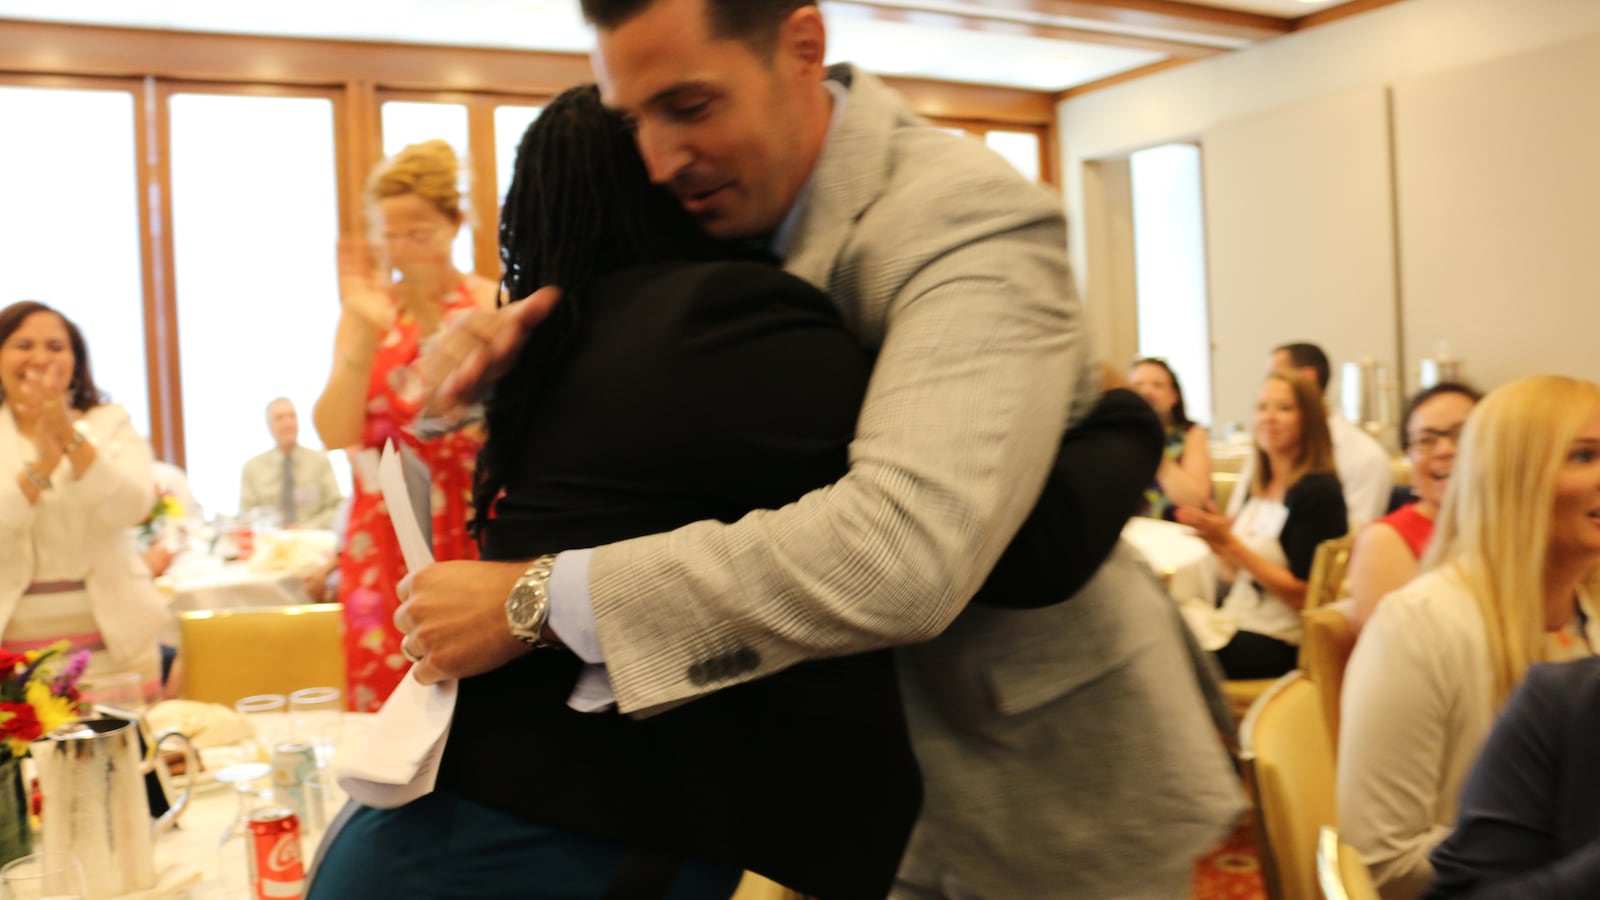 Vincent Gassetto, the principal M.S. 343, hugs a staff member after winning the Teaching Matters prize in July 2017.